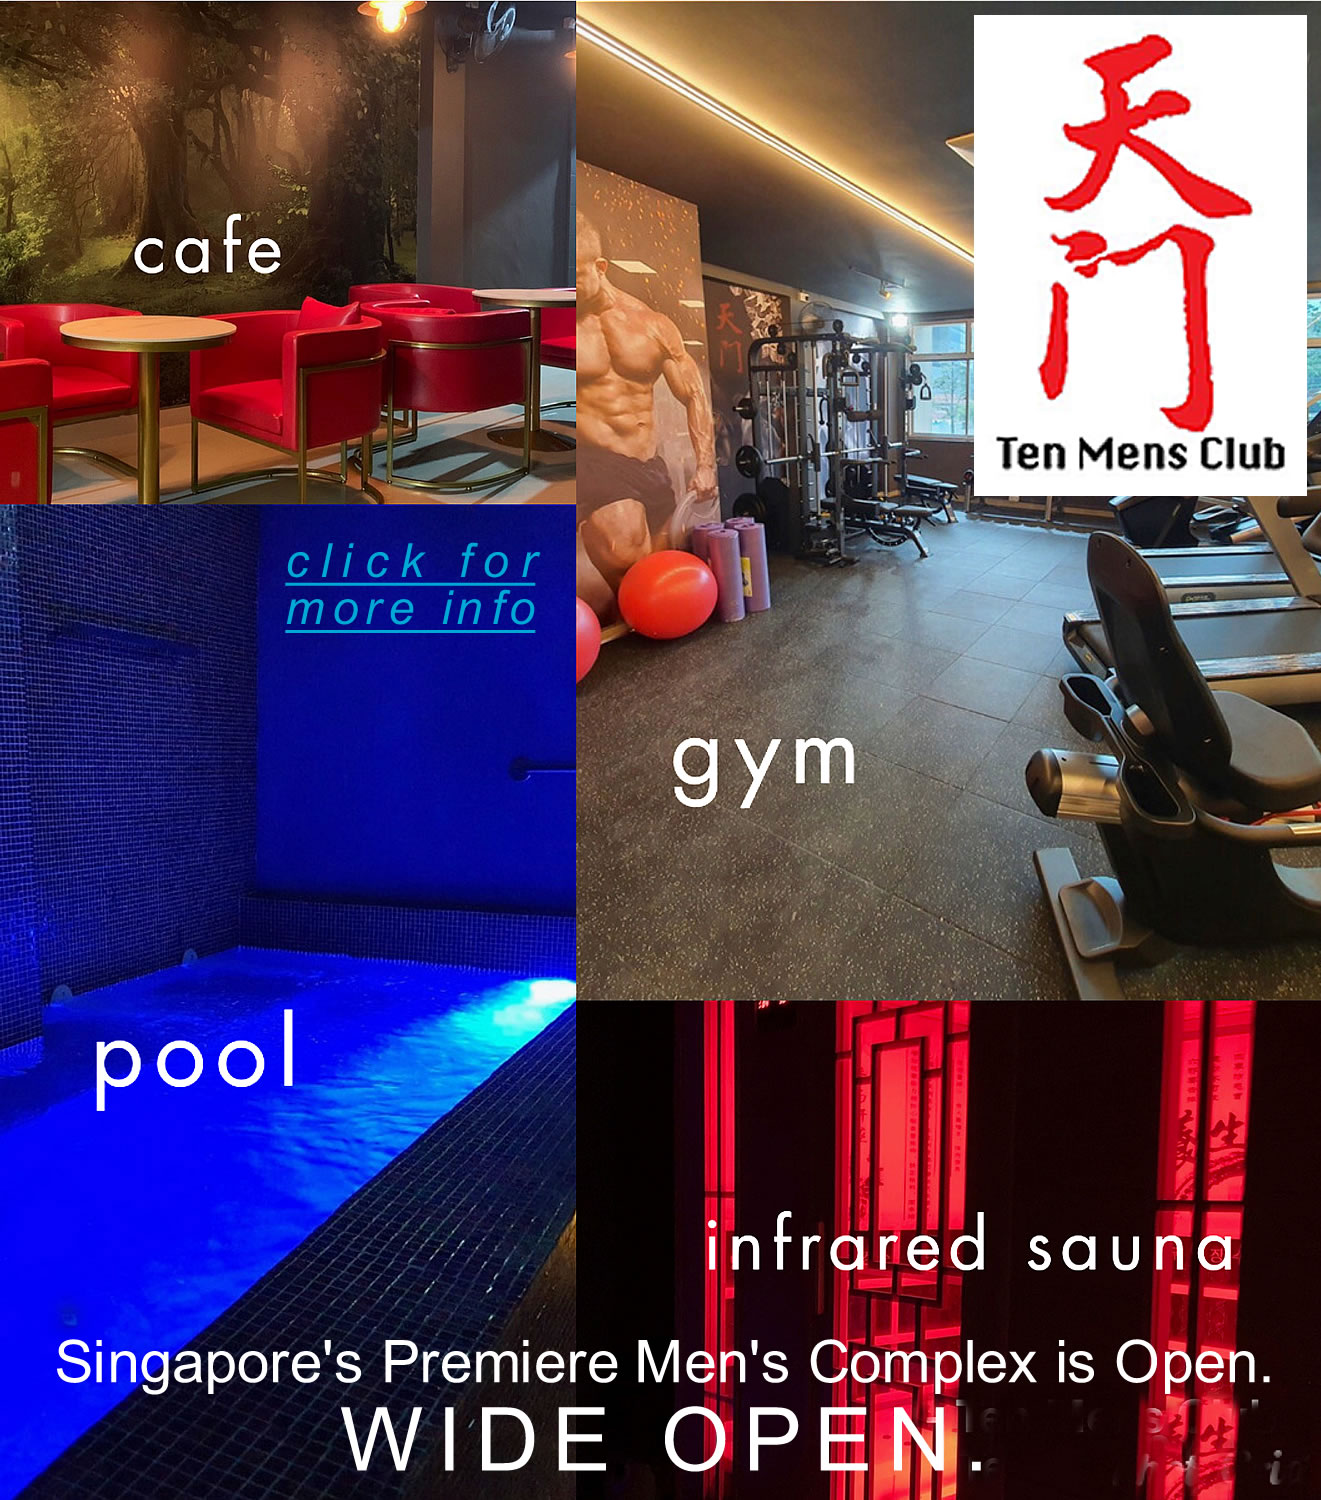 click here for TEN MENS CLUB, Singapore